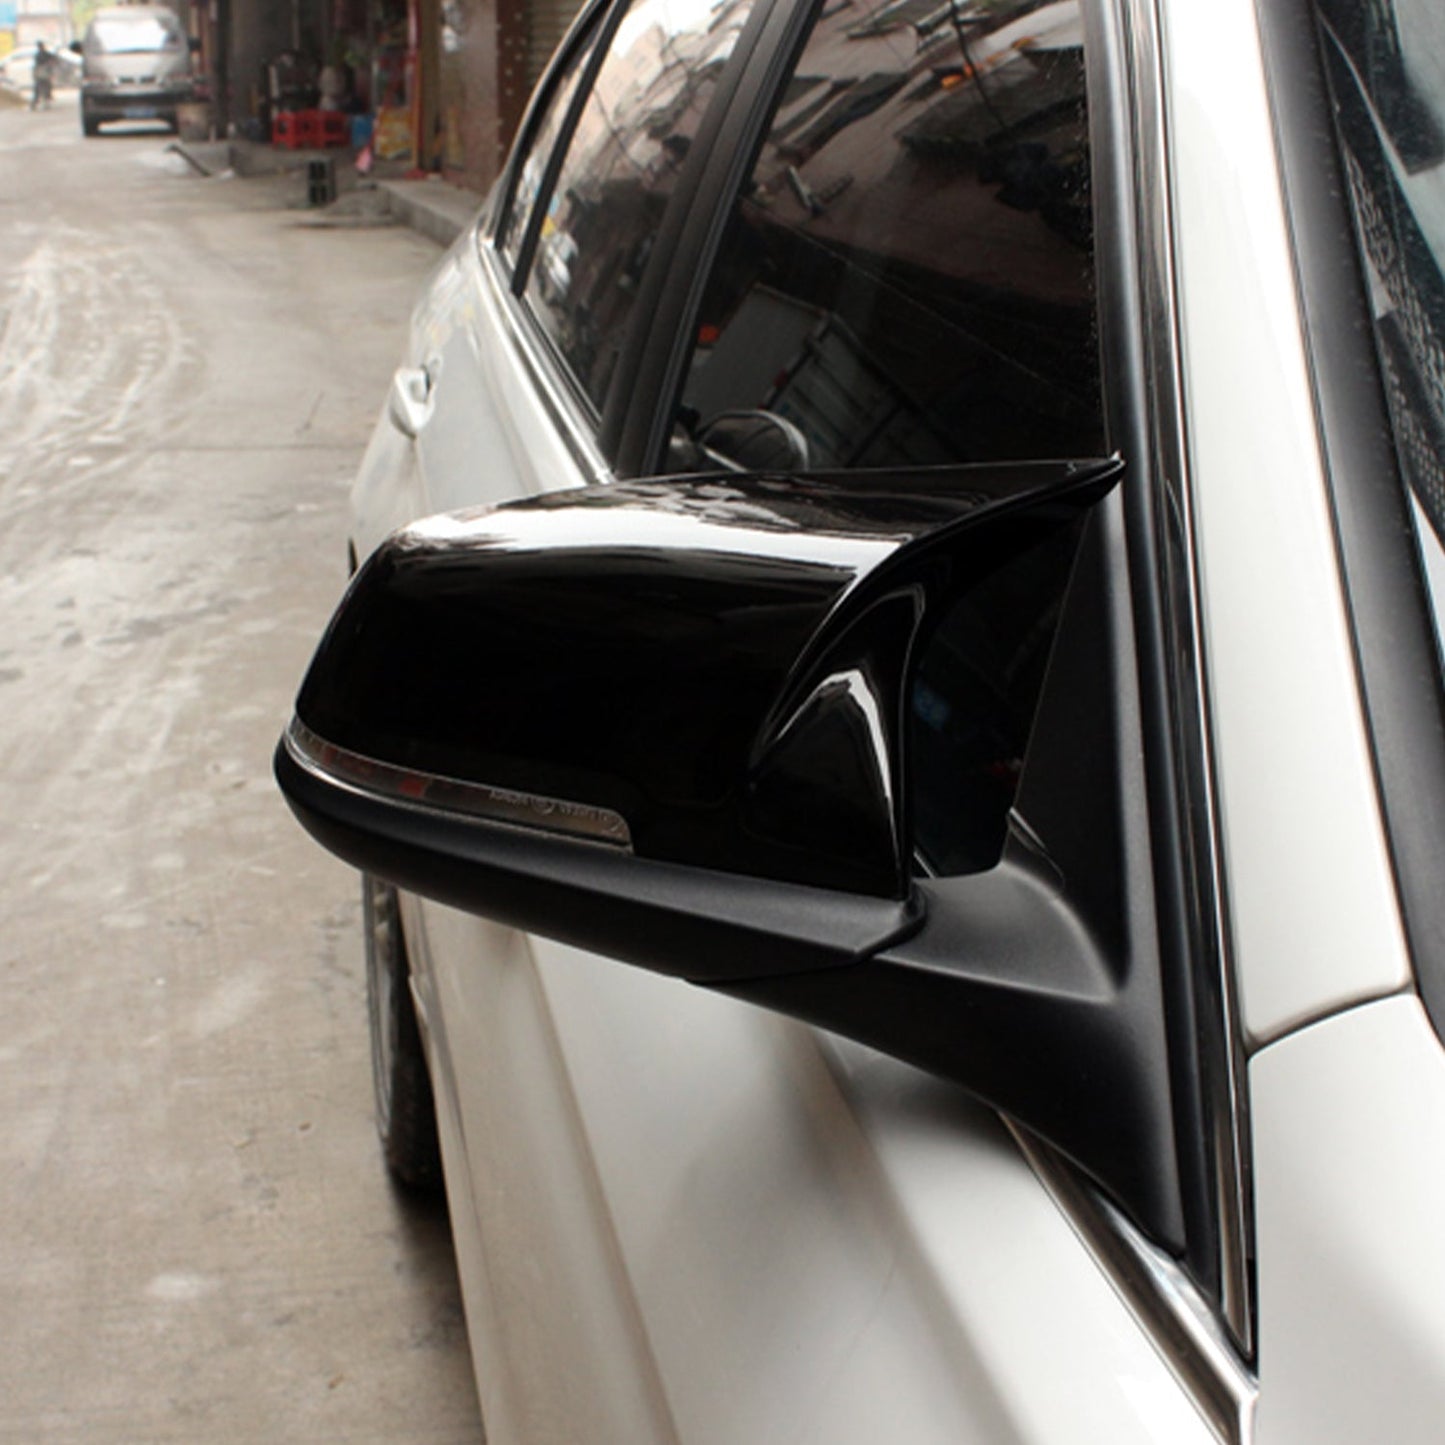 MHC Black BMW M Style Wing Mirror Replacement Covers In Gloss Black-R44 Performance